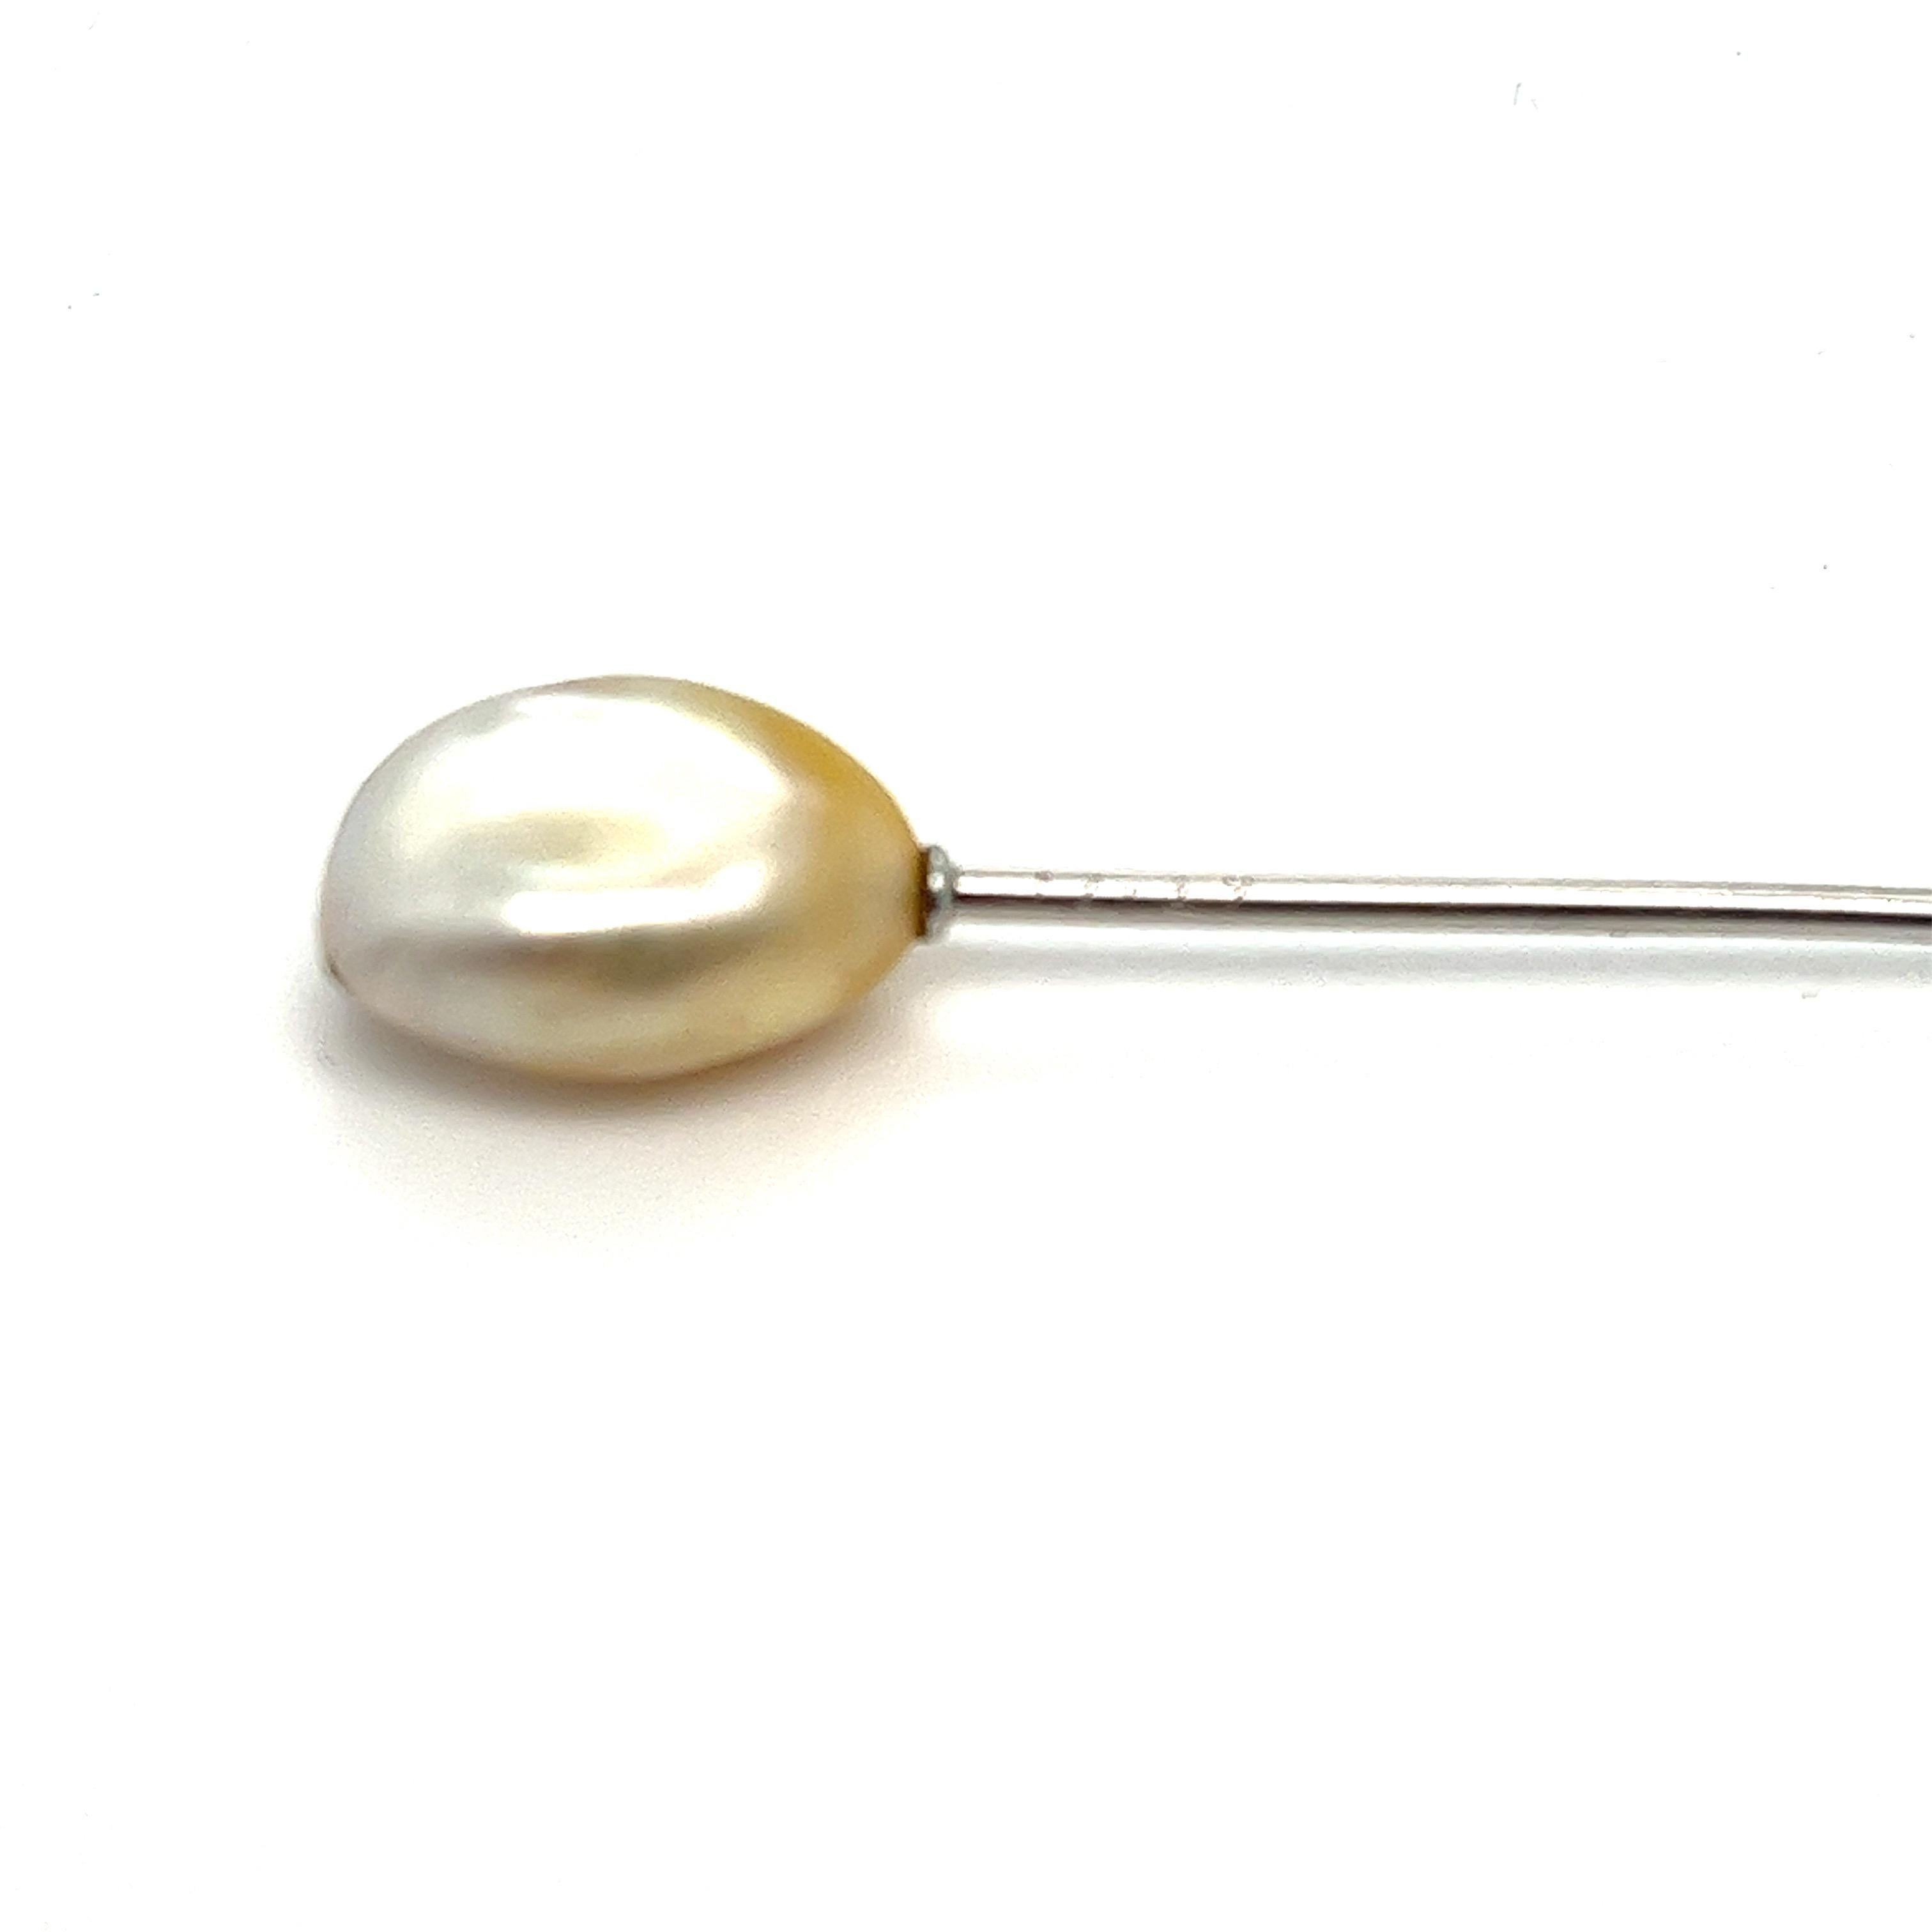 Art Deco Platinum Stick Pin with Natural Pearl - Late 19th Century Elegance In Good Condition For Sale In Miami, FL